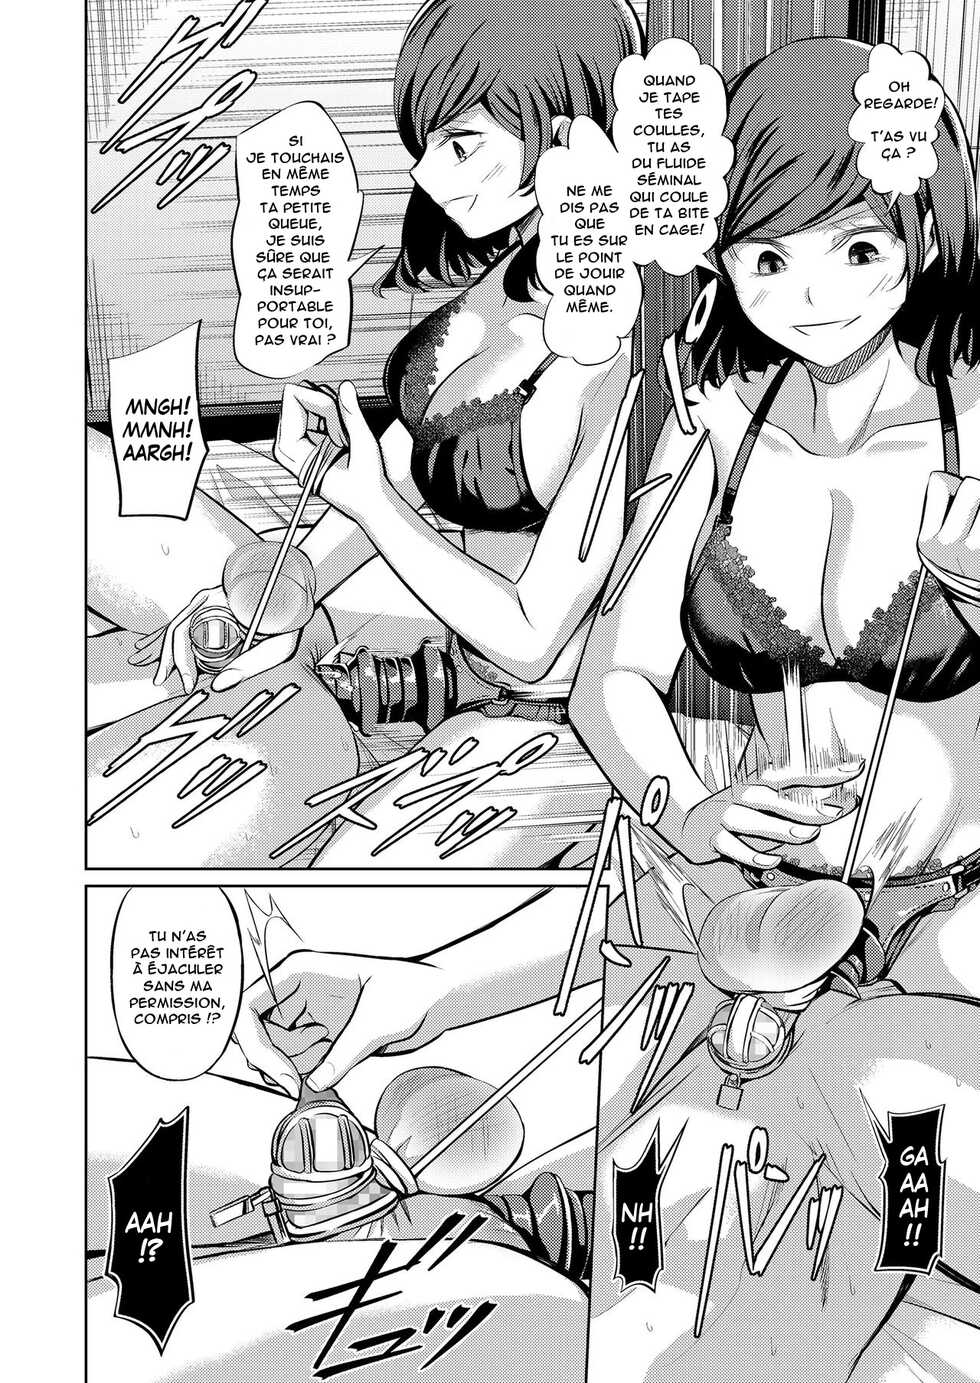 [Yamahata Rian] Tensuushugi no Kuni | A Country Based on Point System (Girls forM Vol. 20) [French] [Anatoh] [Digital] - Page 30